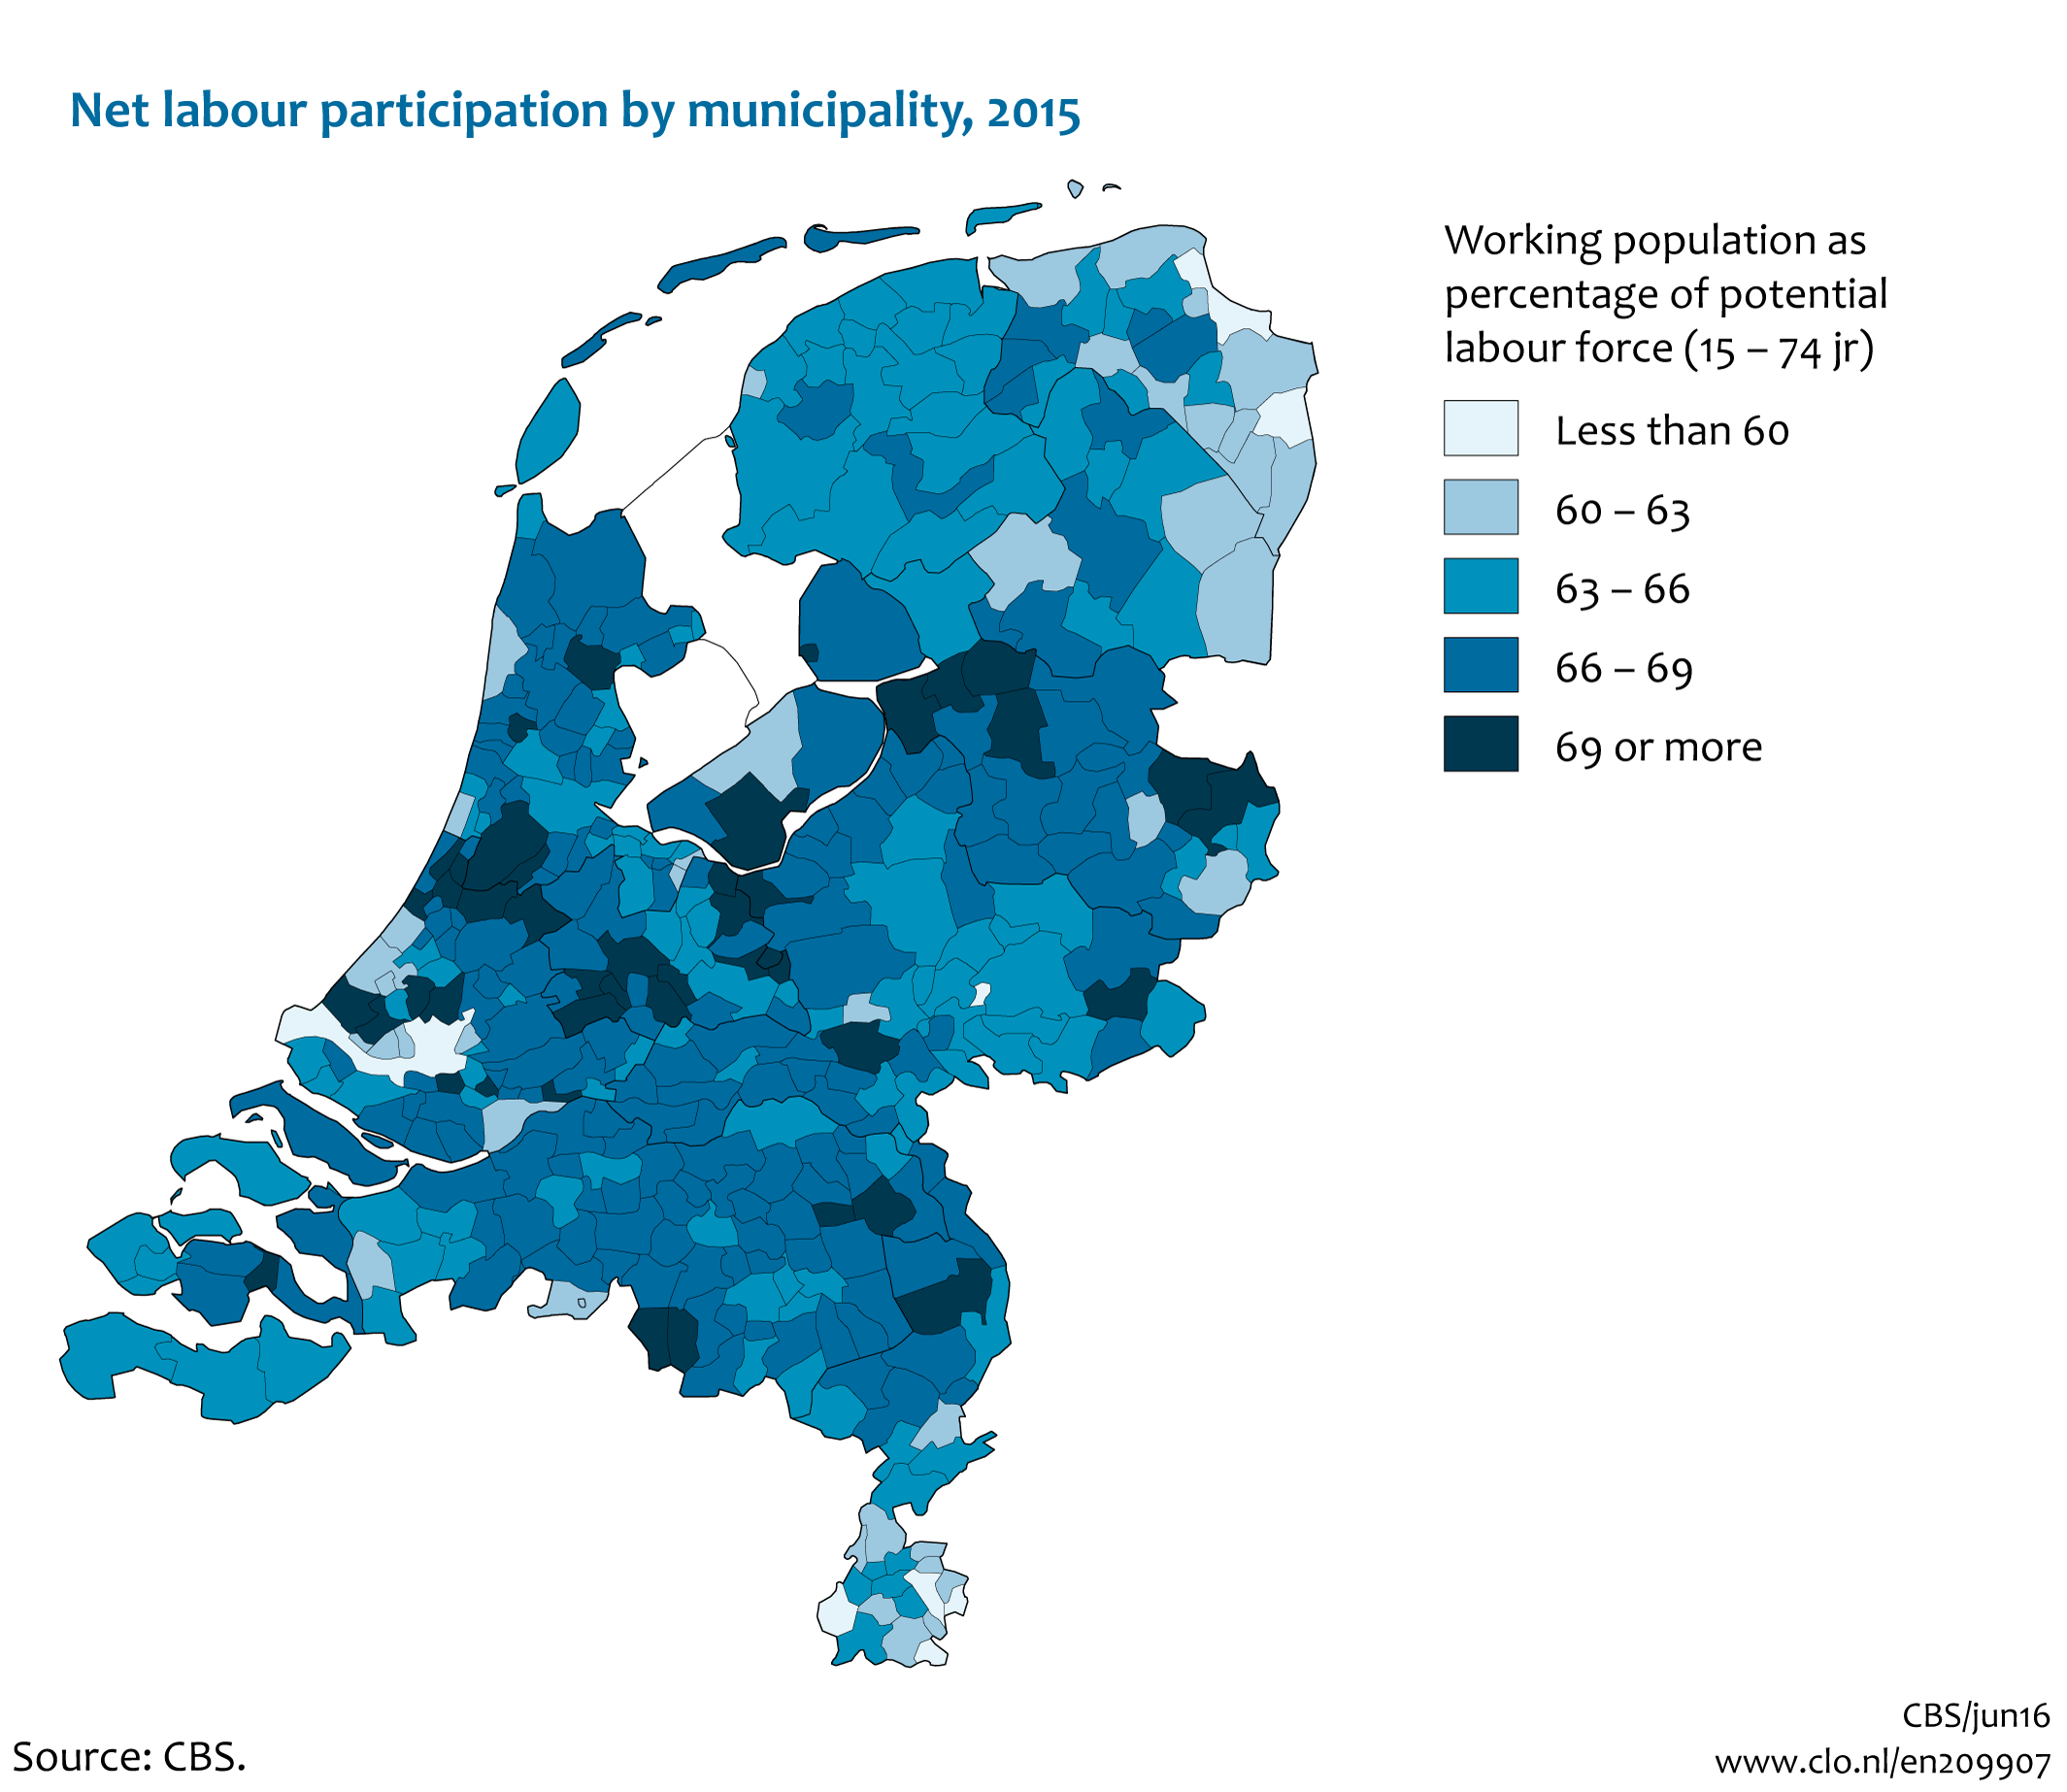 Image  Net labour participation by municipality. The image is further explained in the text.